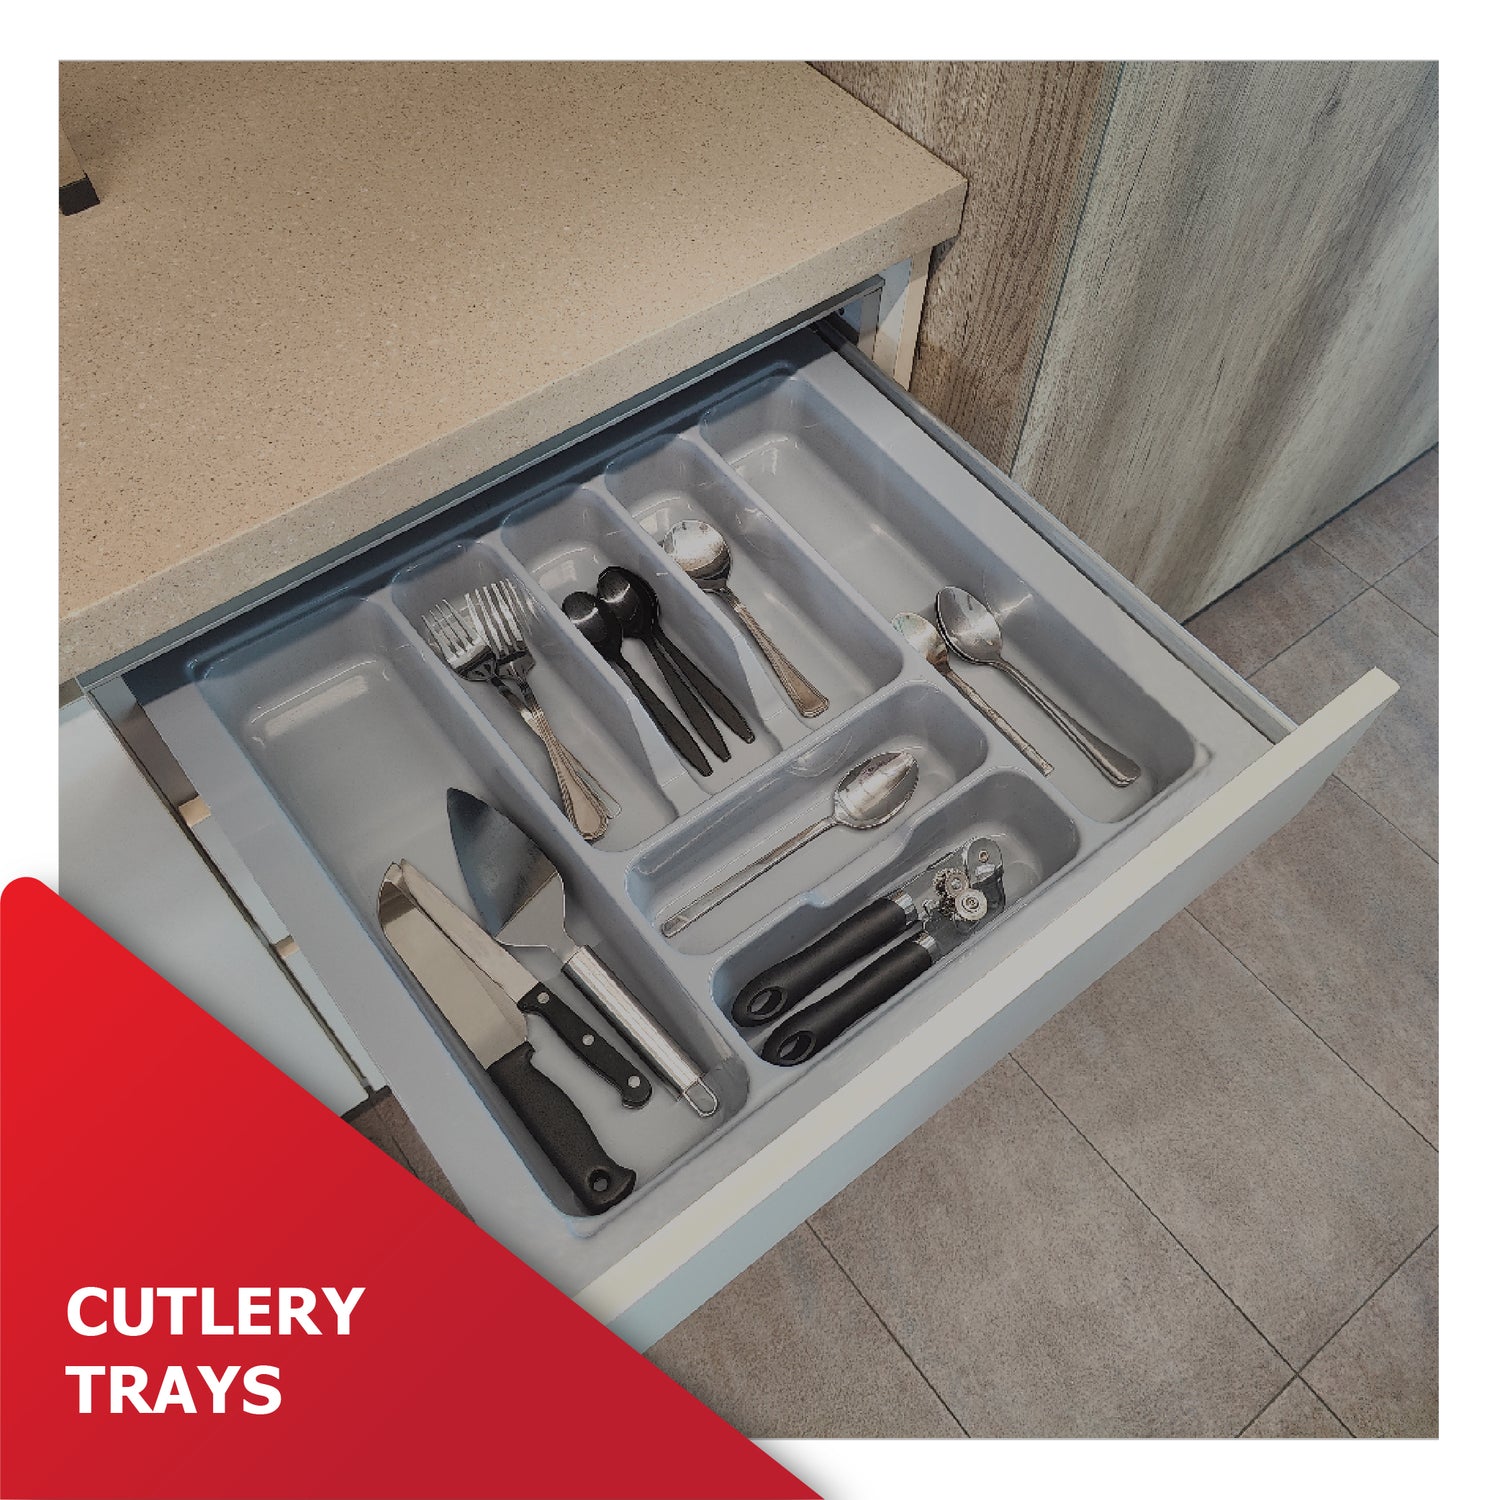 Cutlery trays - Keep your kitchen drawers organized with our stylish and functional cutlery trays.